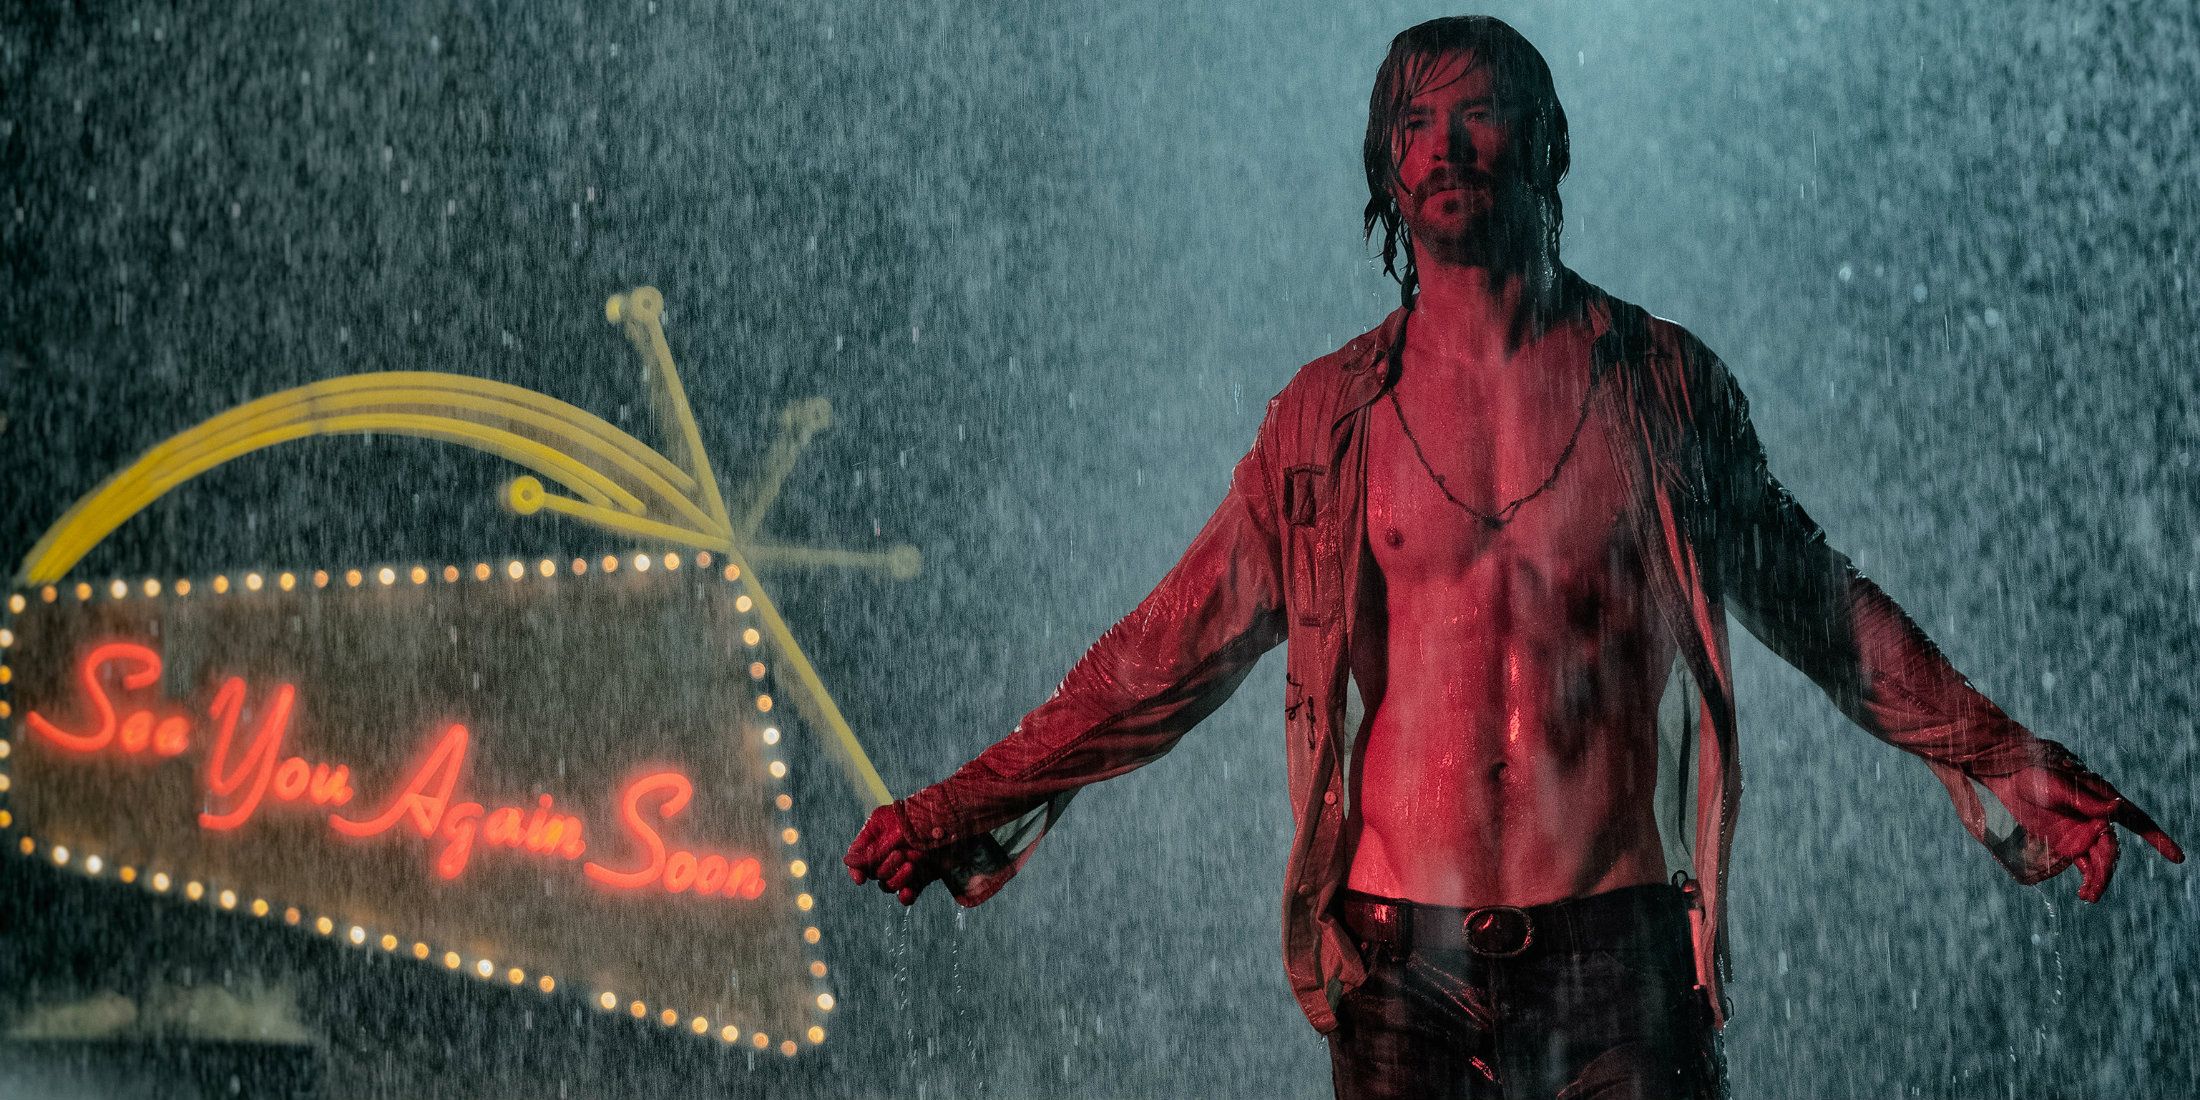 Billy Lee spreading his arms under the rain in Bad Times at the El Royale